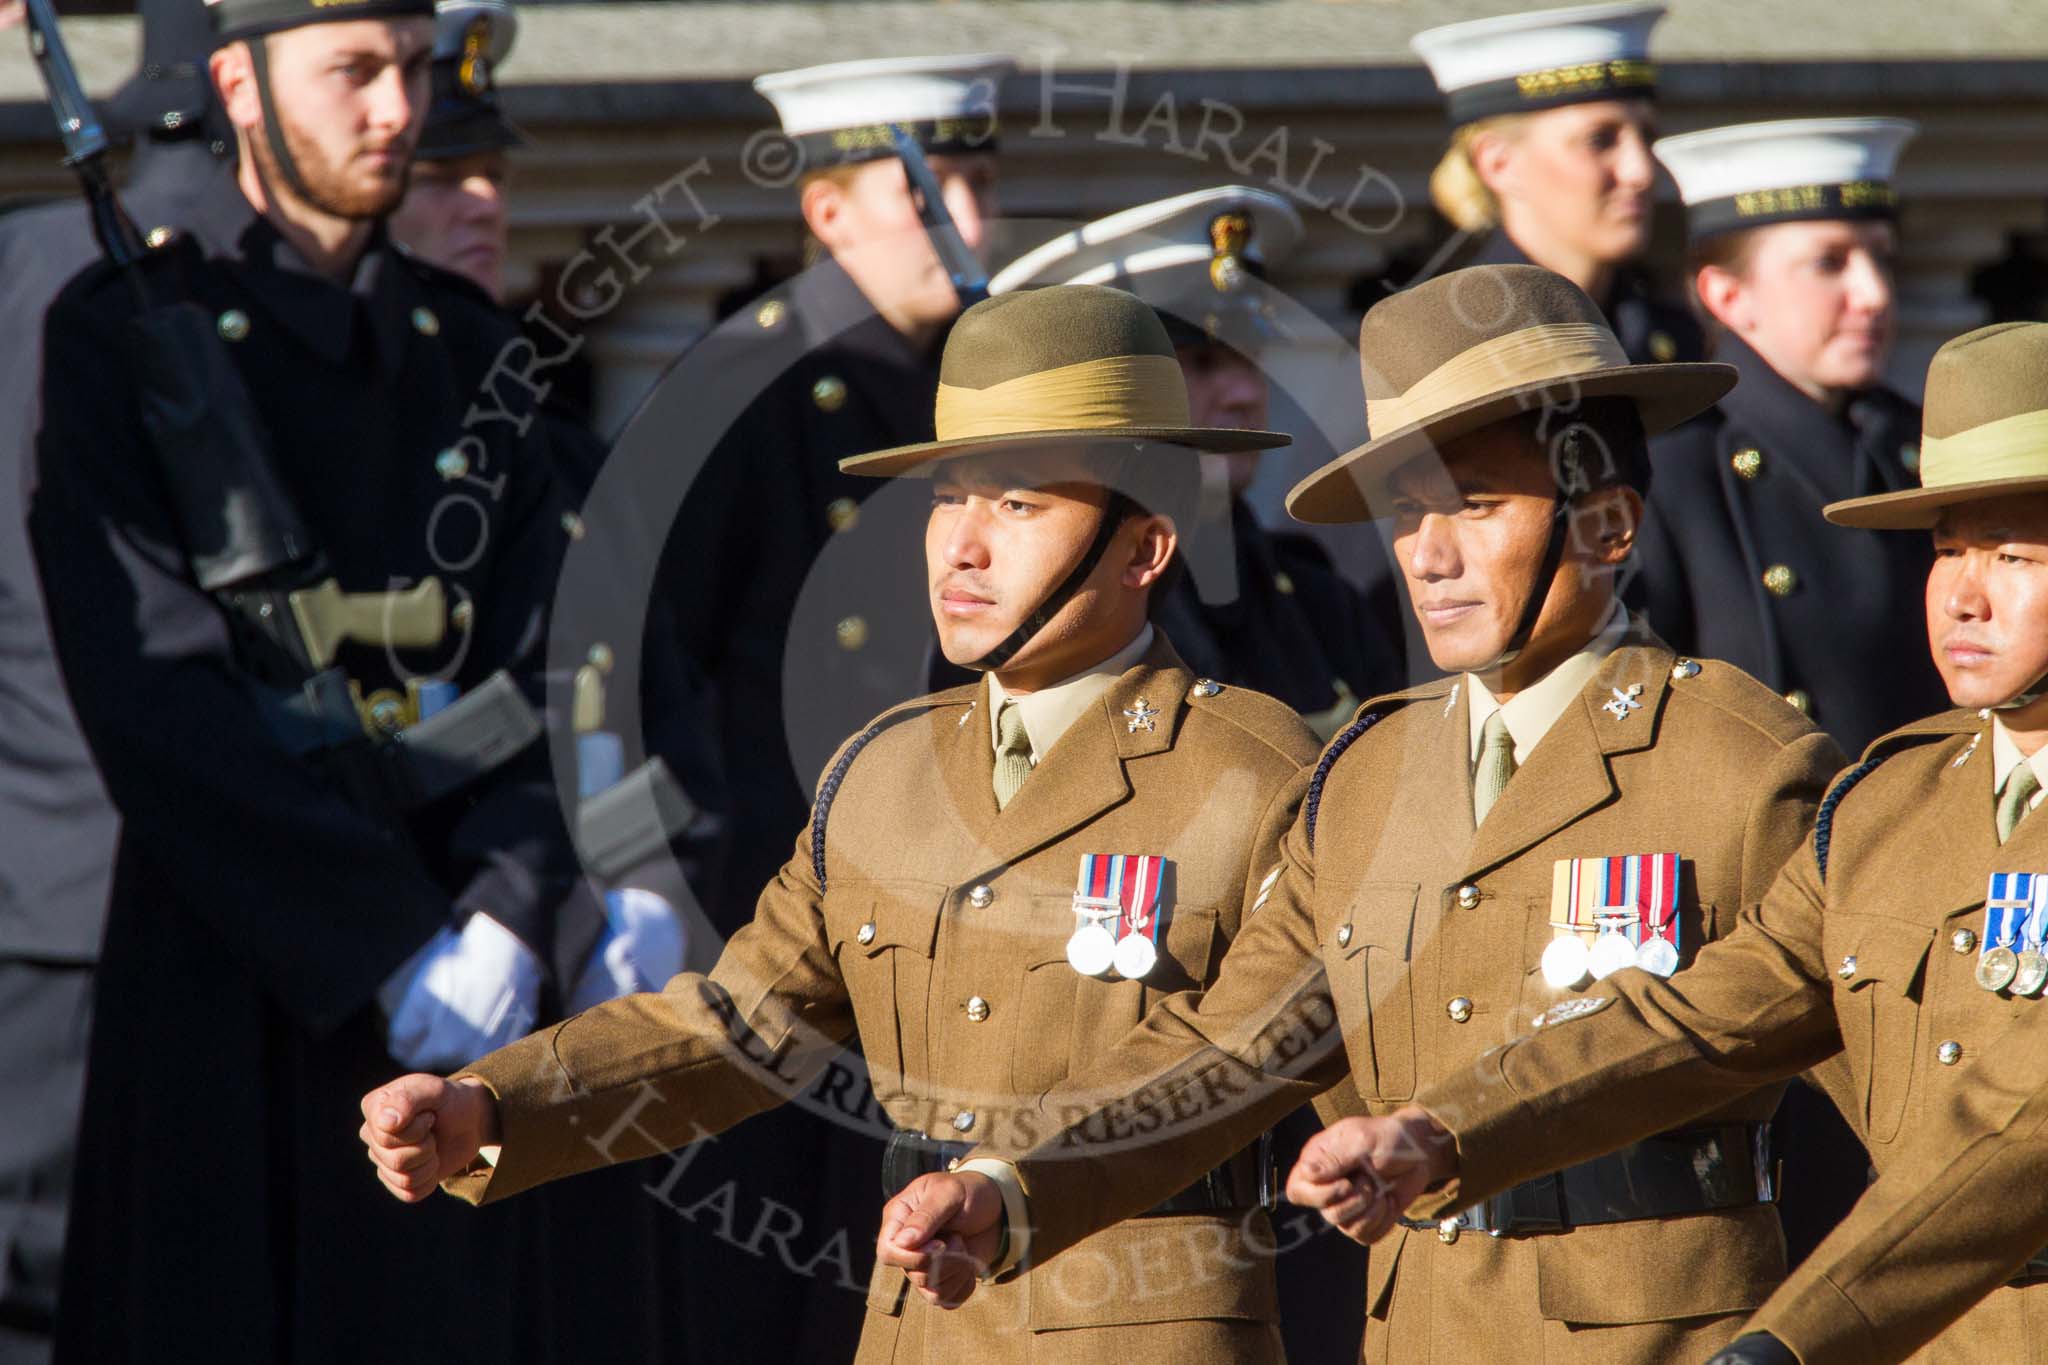 Remembrance Sunday at the Cenotaph in London 2014: Group F14 - National Malaya & Borneo Veterans Association.
Press stand opposite the Foreign Office building, Whitehall, London SW1,
London,
Greater London,
United Kingdom,
on 09 November 2014 at 11:58, image #1013